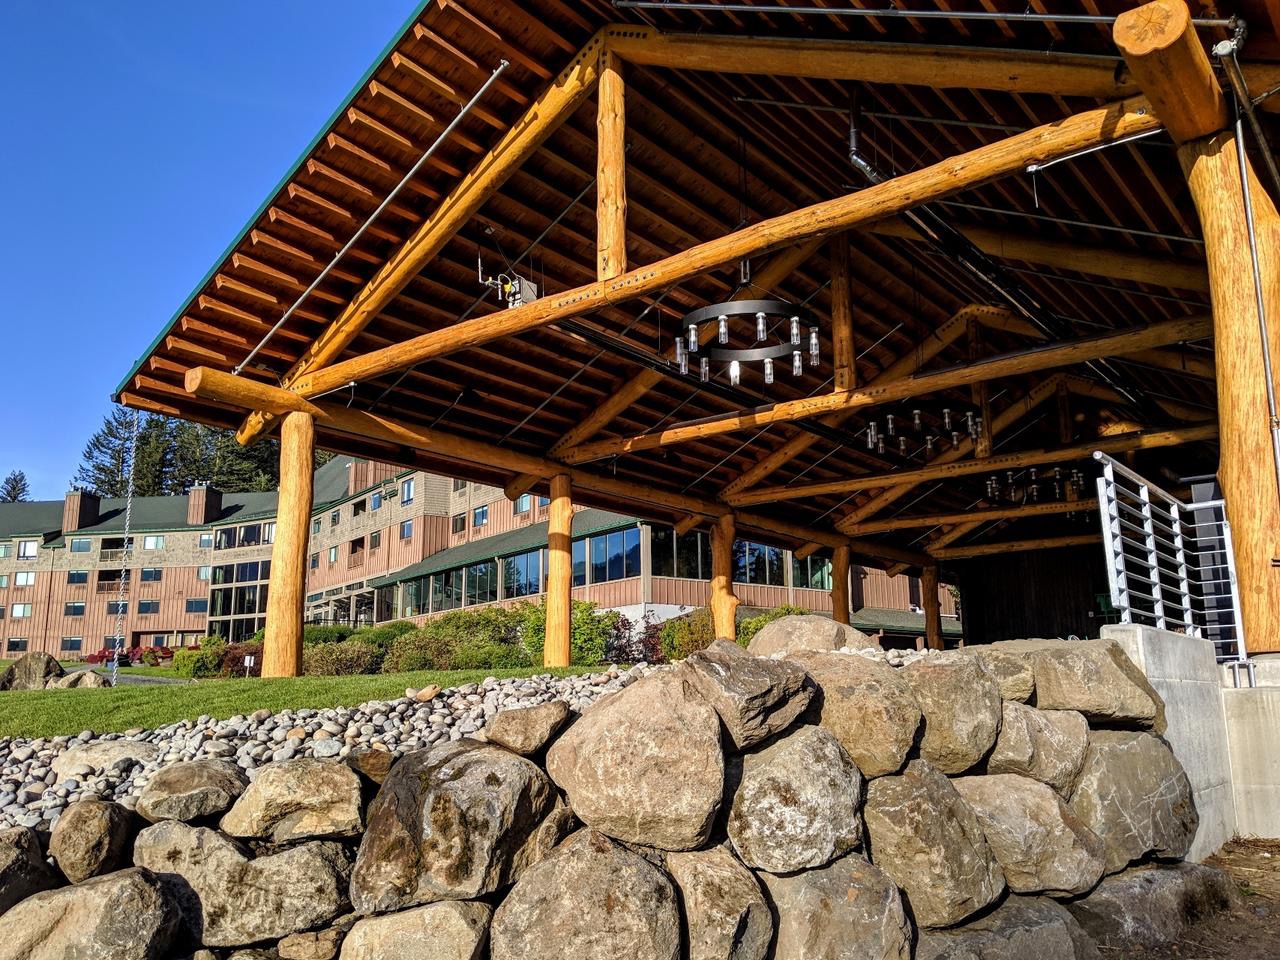 image of the new Riverview Pavilion courtesy of Skamania Lodge